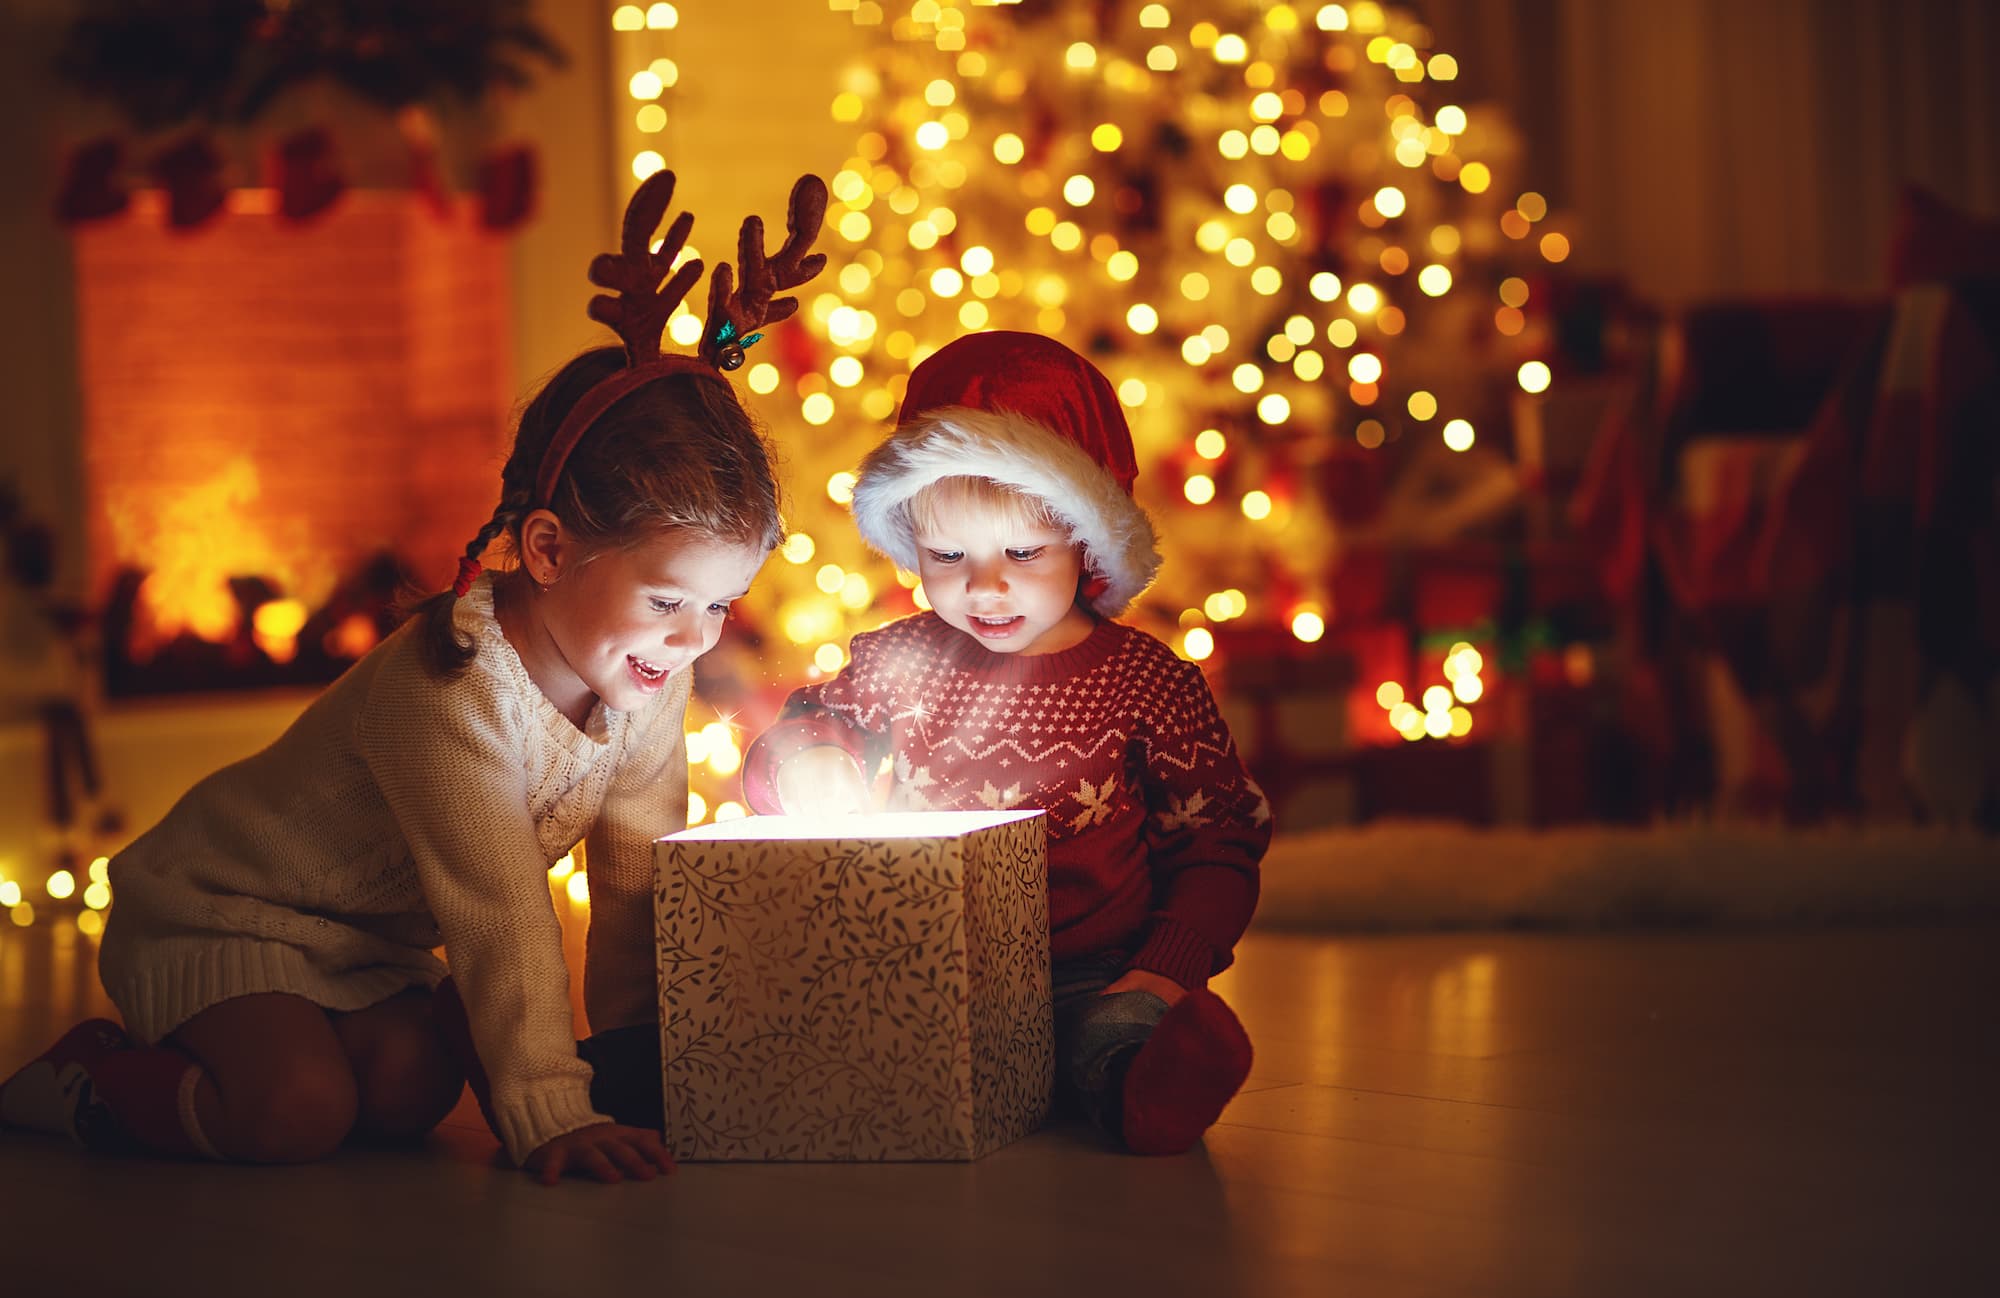 Two children open a Christmas present in front of an illuminated Christmas tree.